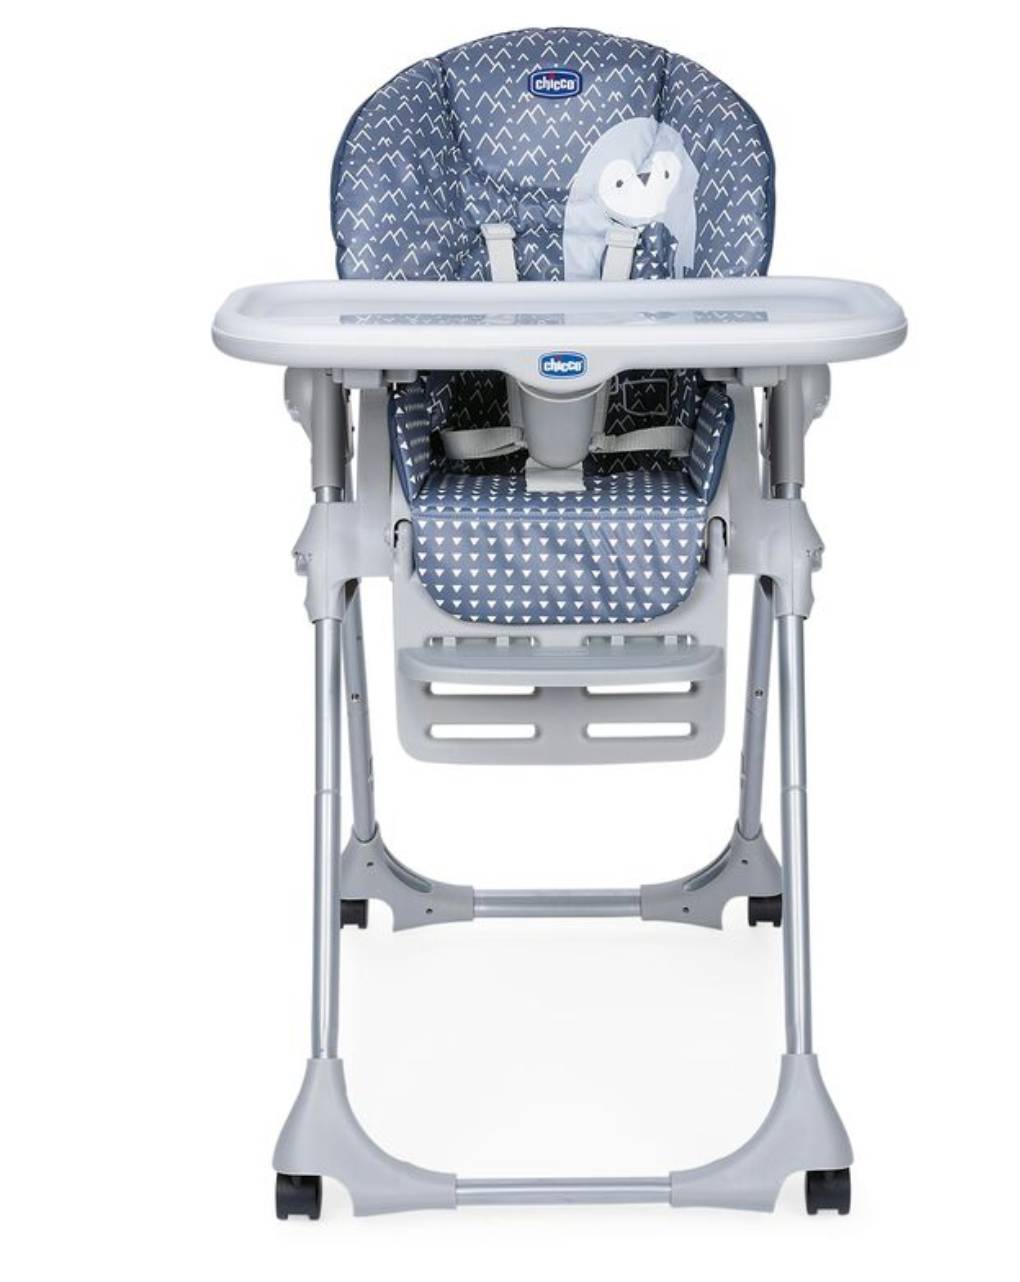 Chicco κάθισμα φαγητού polly easy/95 penguin - Chicco